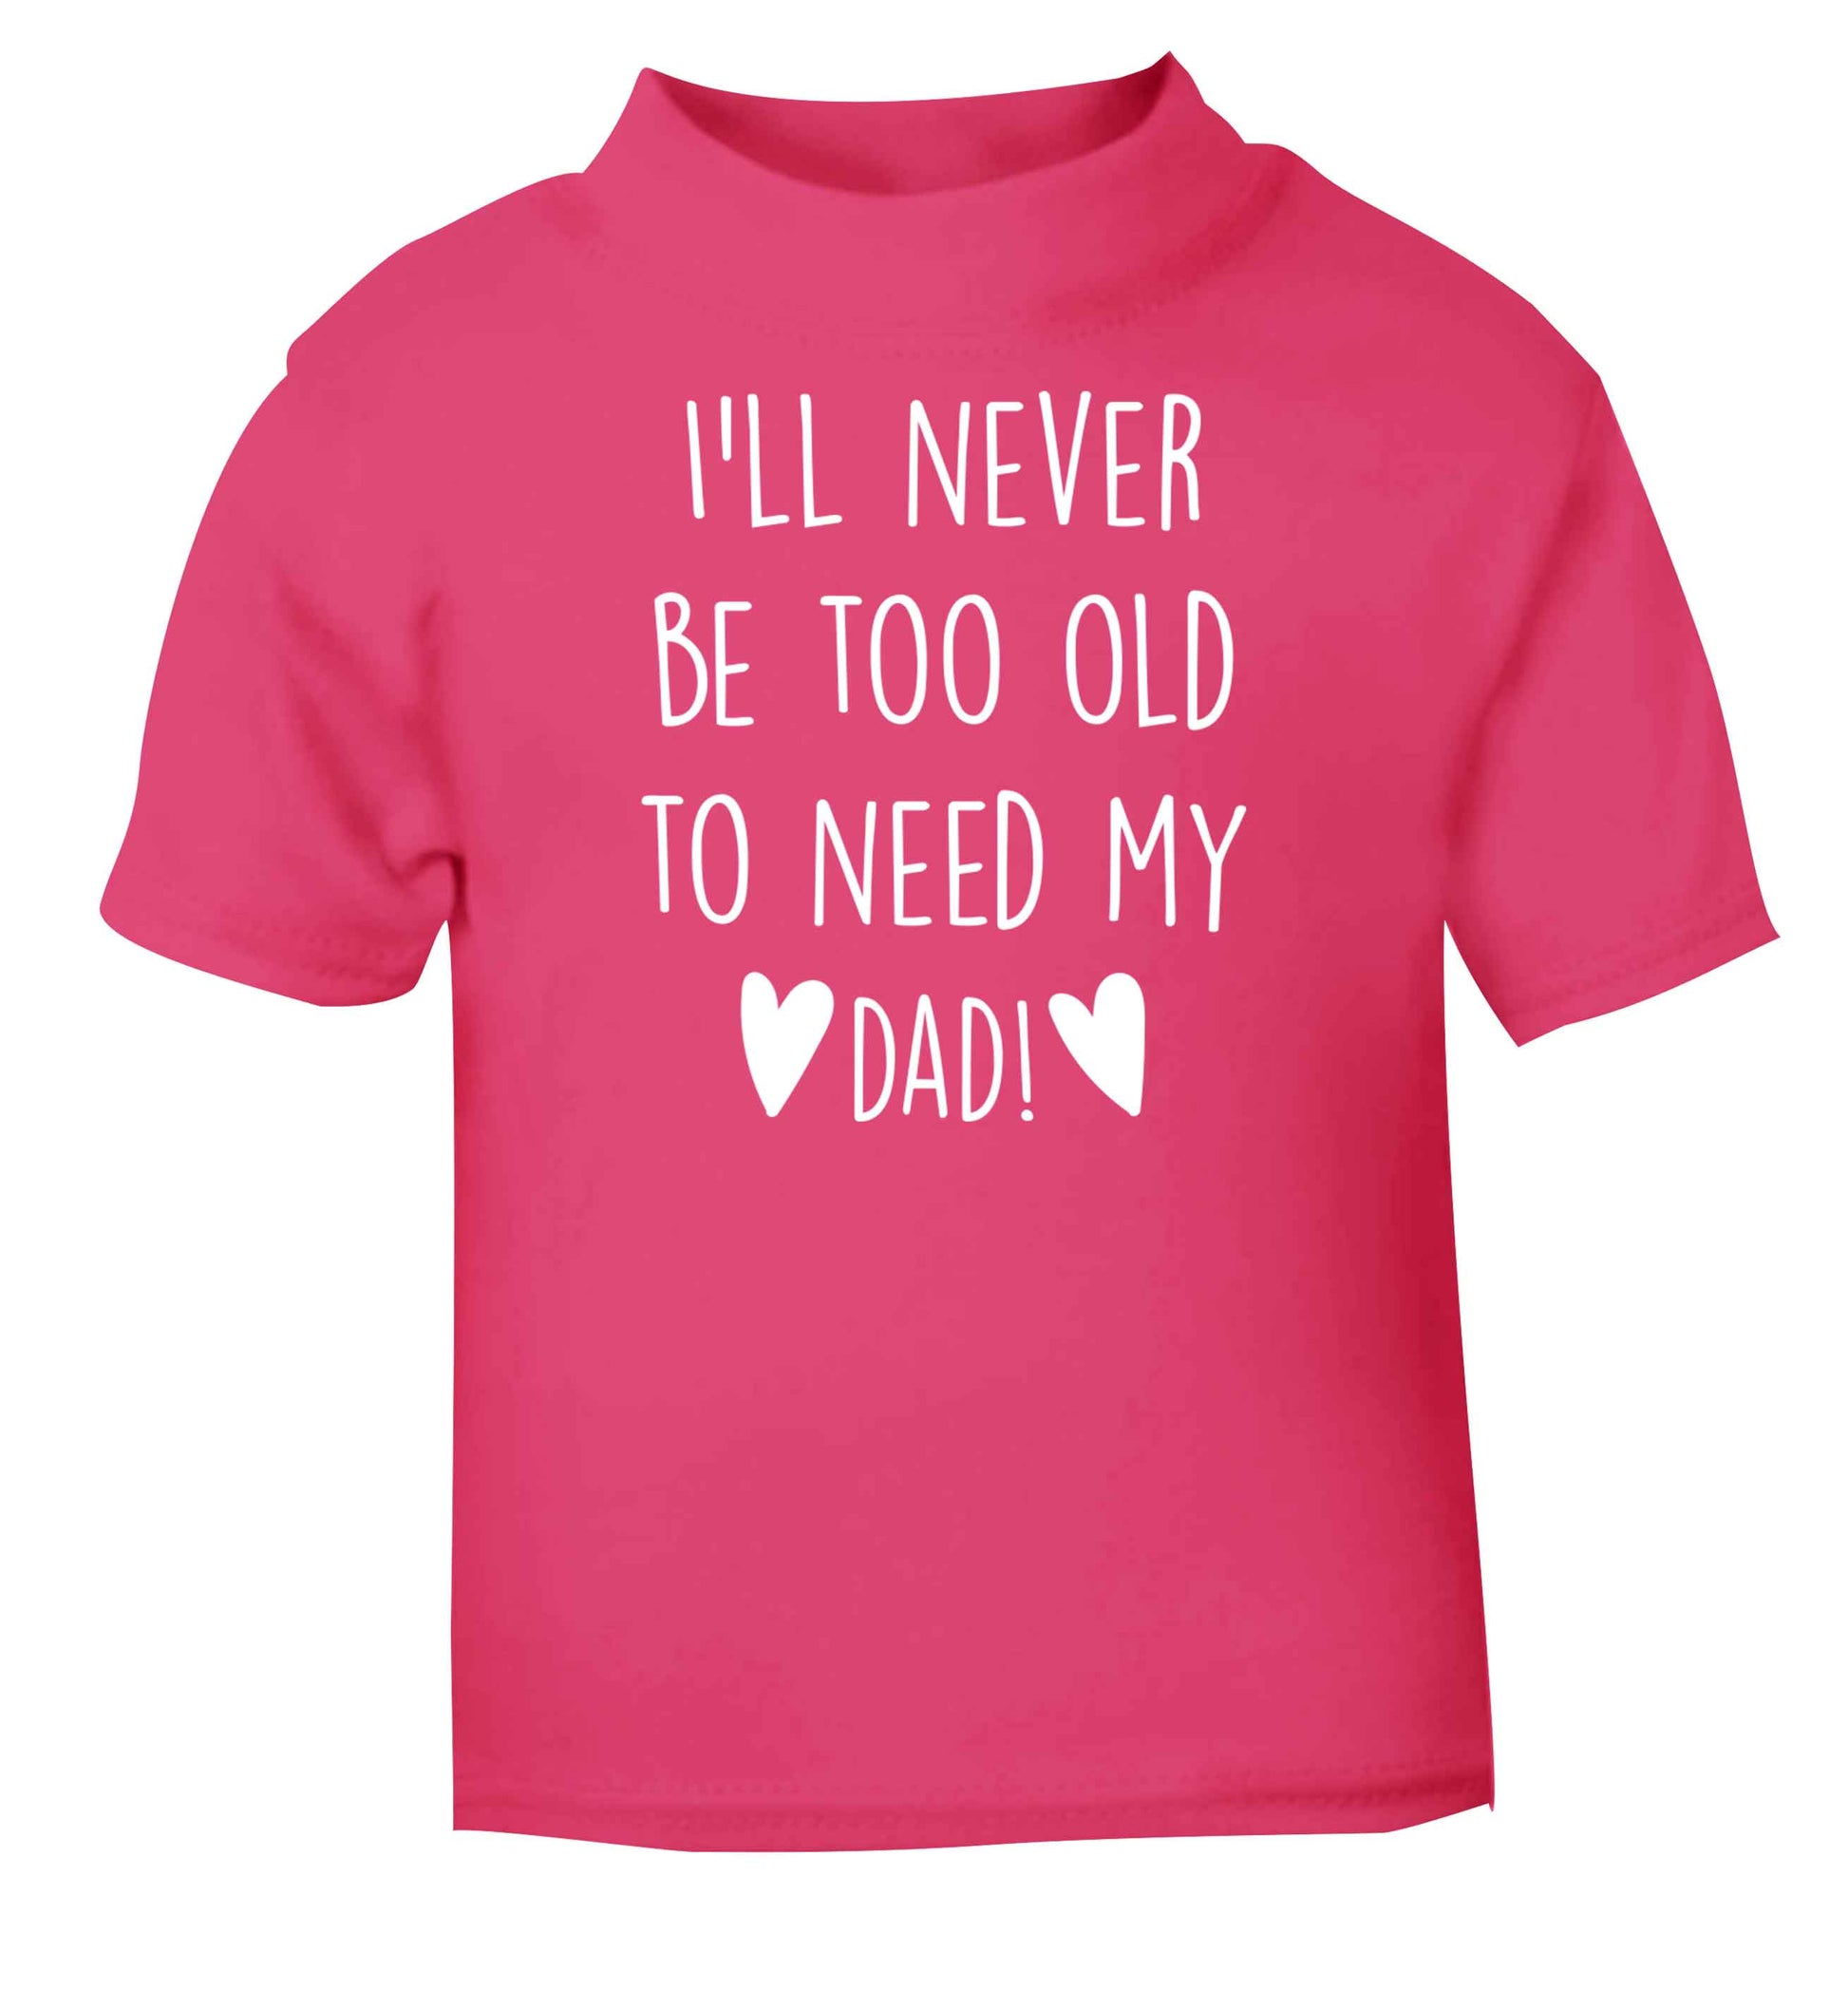 I'll never be too old to need my dad pink baby toddler Tshirt 2 Years